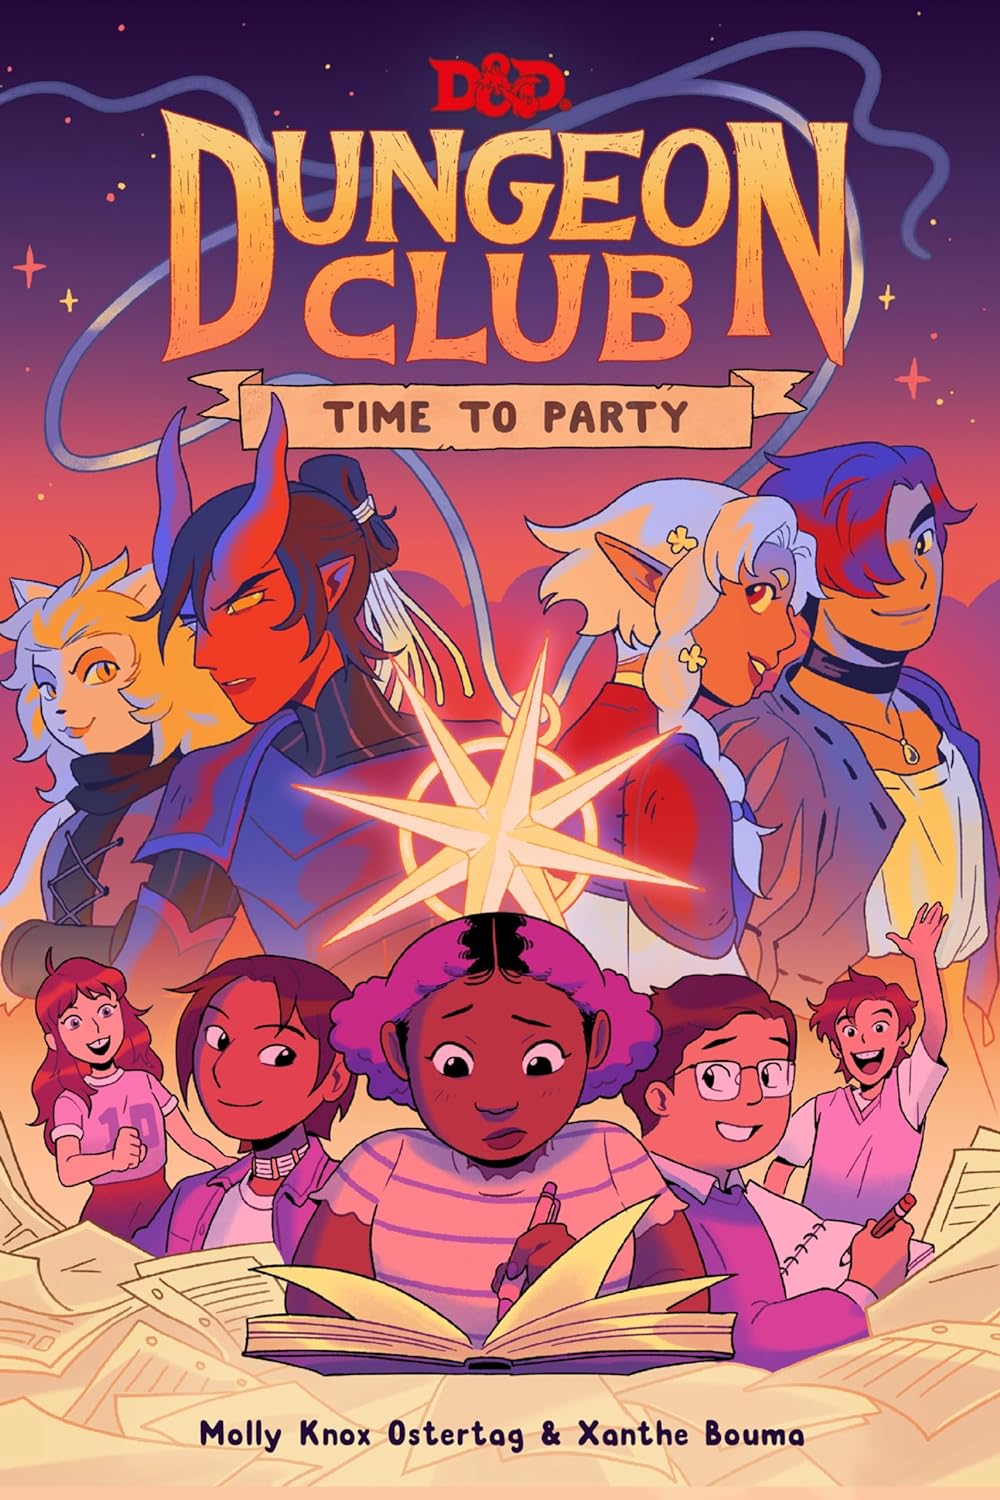 Dungeons & Dragons Dungeon Club Time To Party by Molly Knox Ostertag